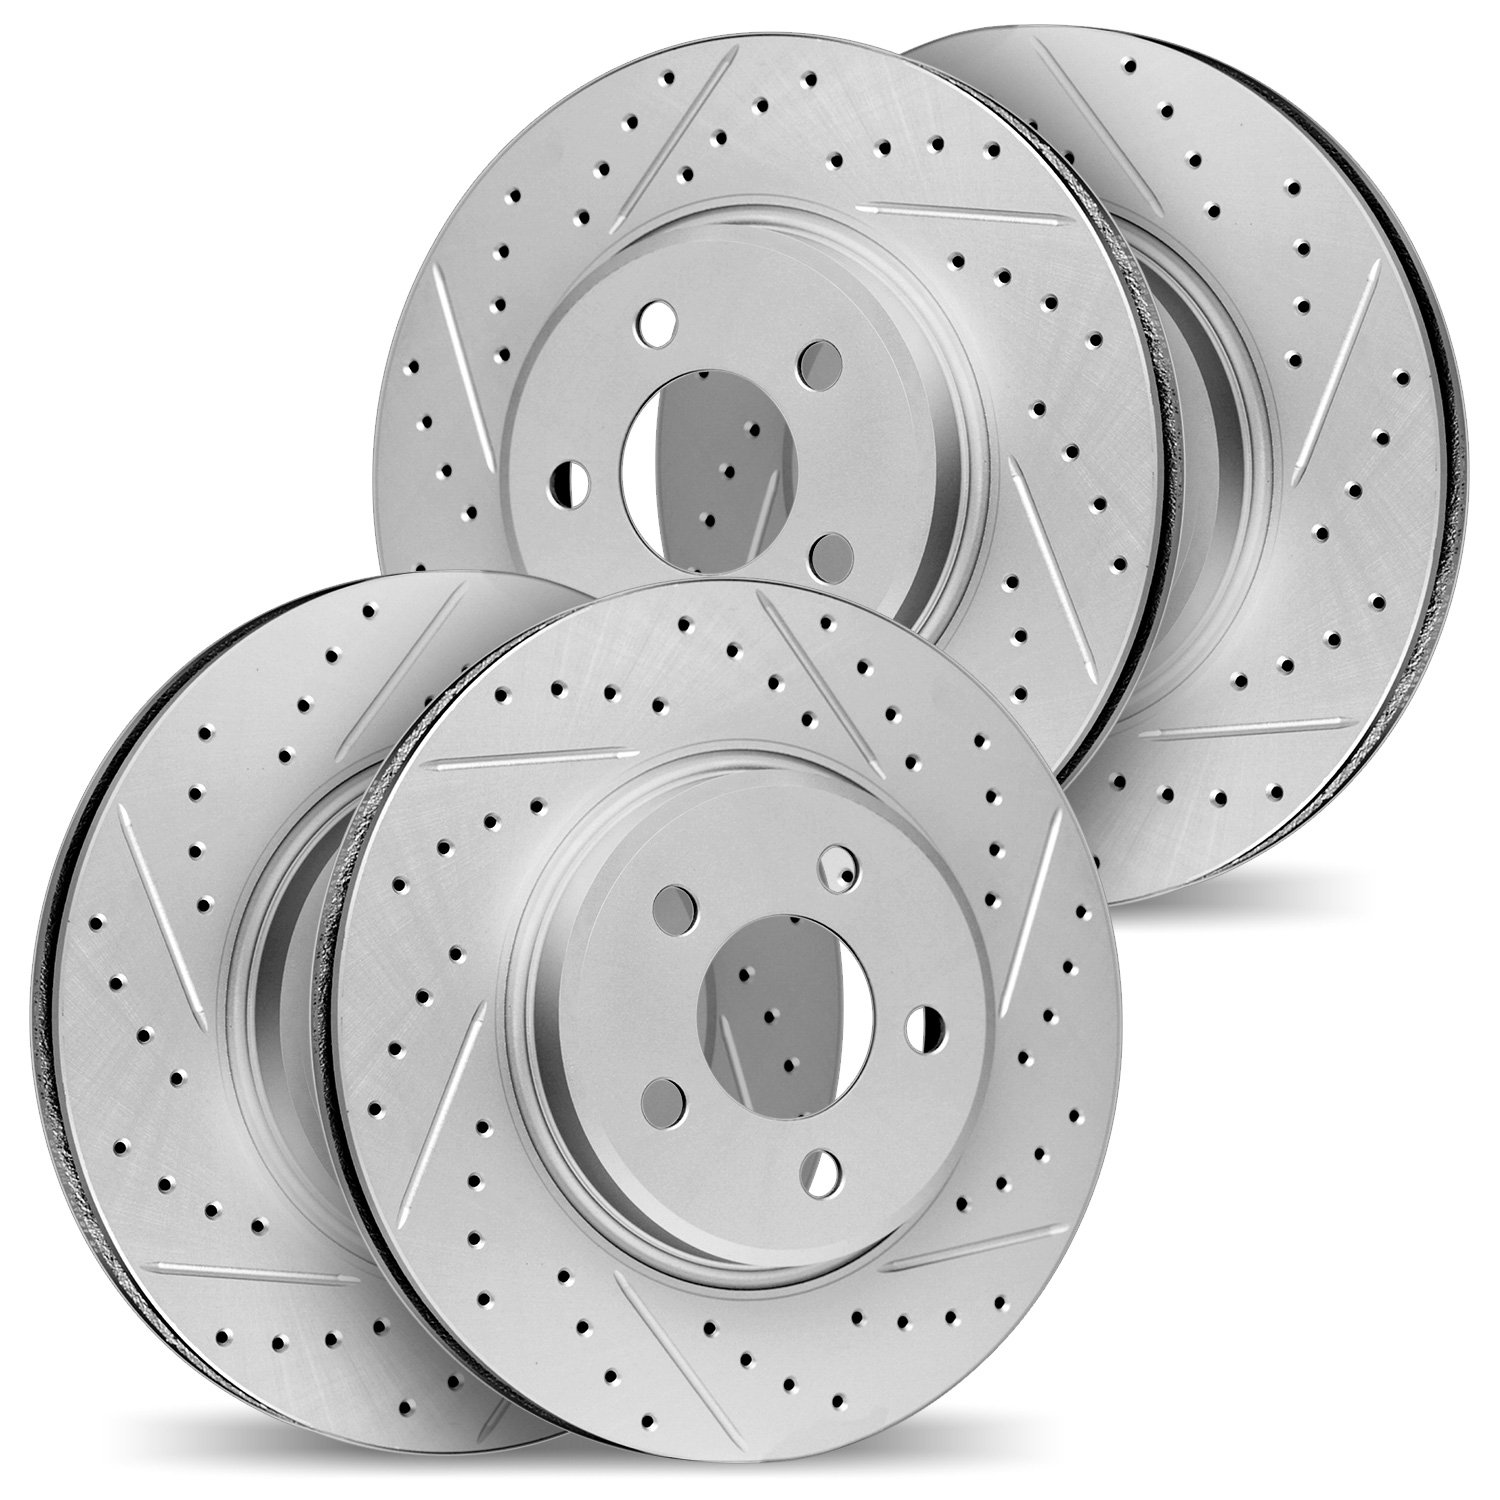 2004-55001 Geoperformance Drilled/Slotted Brake Rotors, Fits Select Ford/Lincoln/Mercury/Mazda, Position: Front and Rear